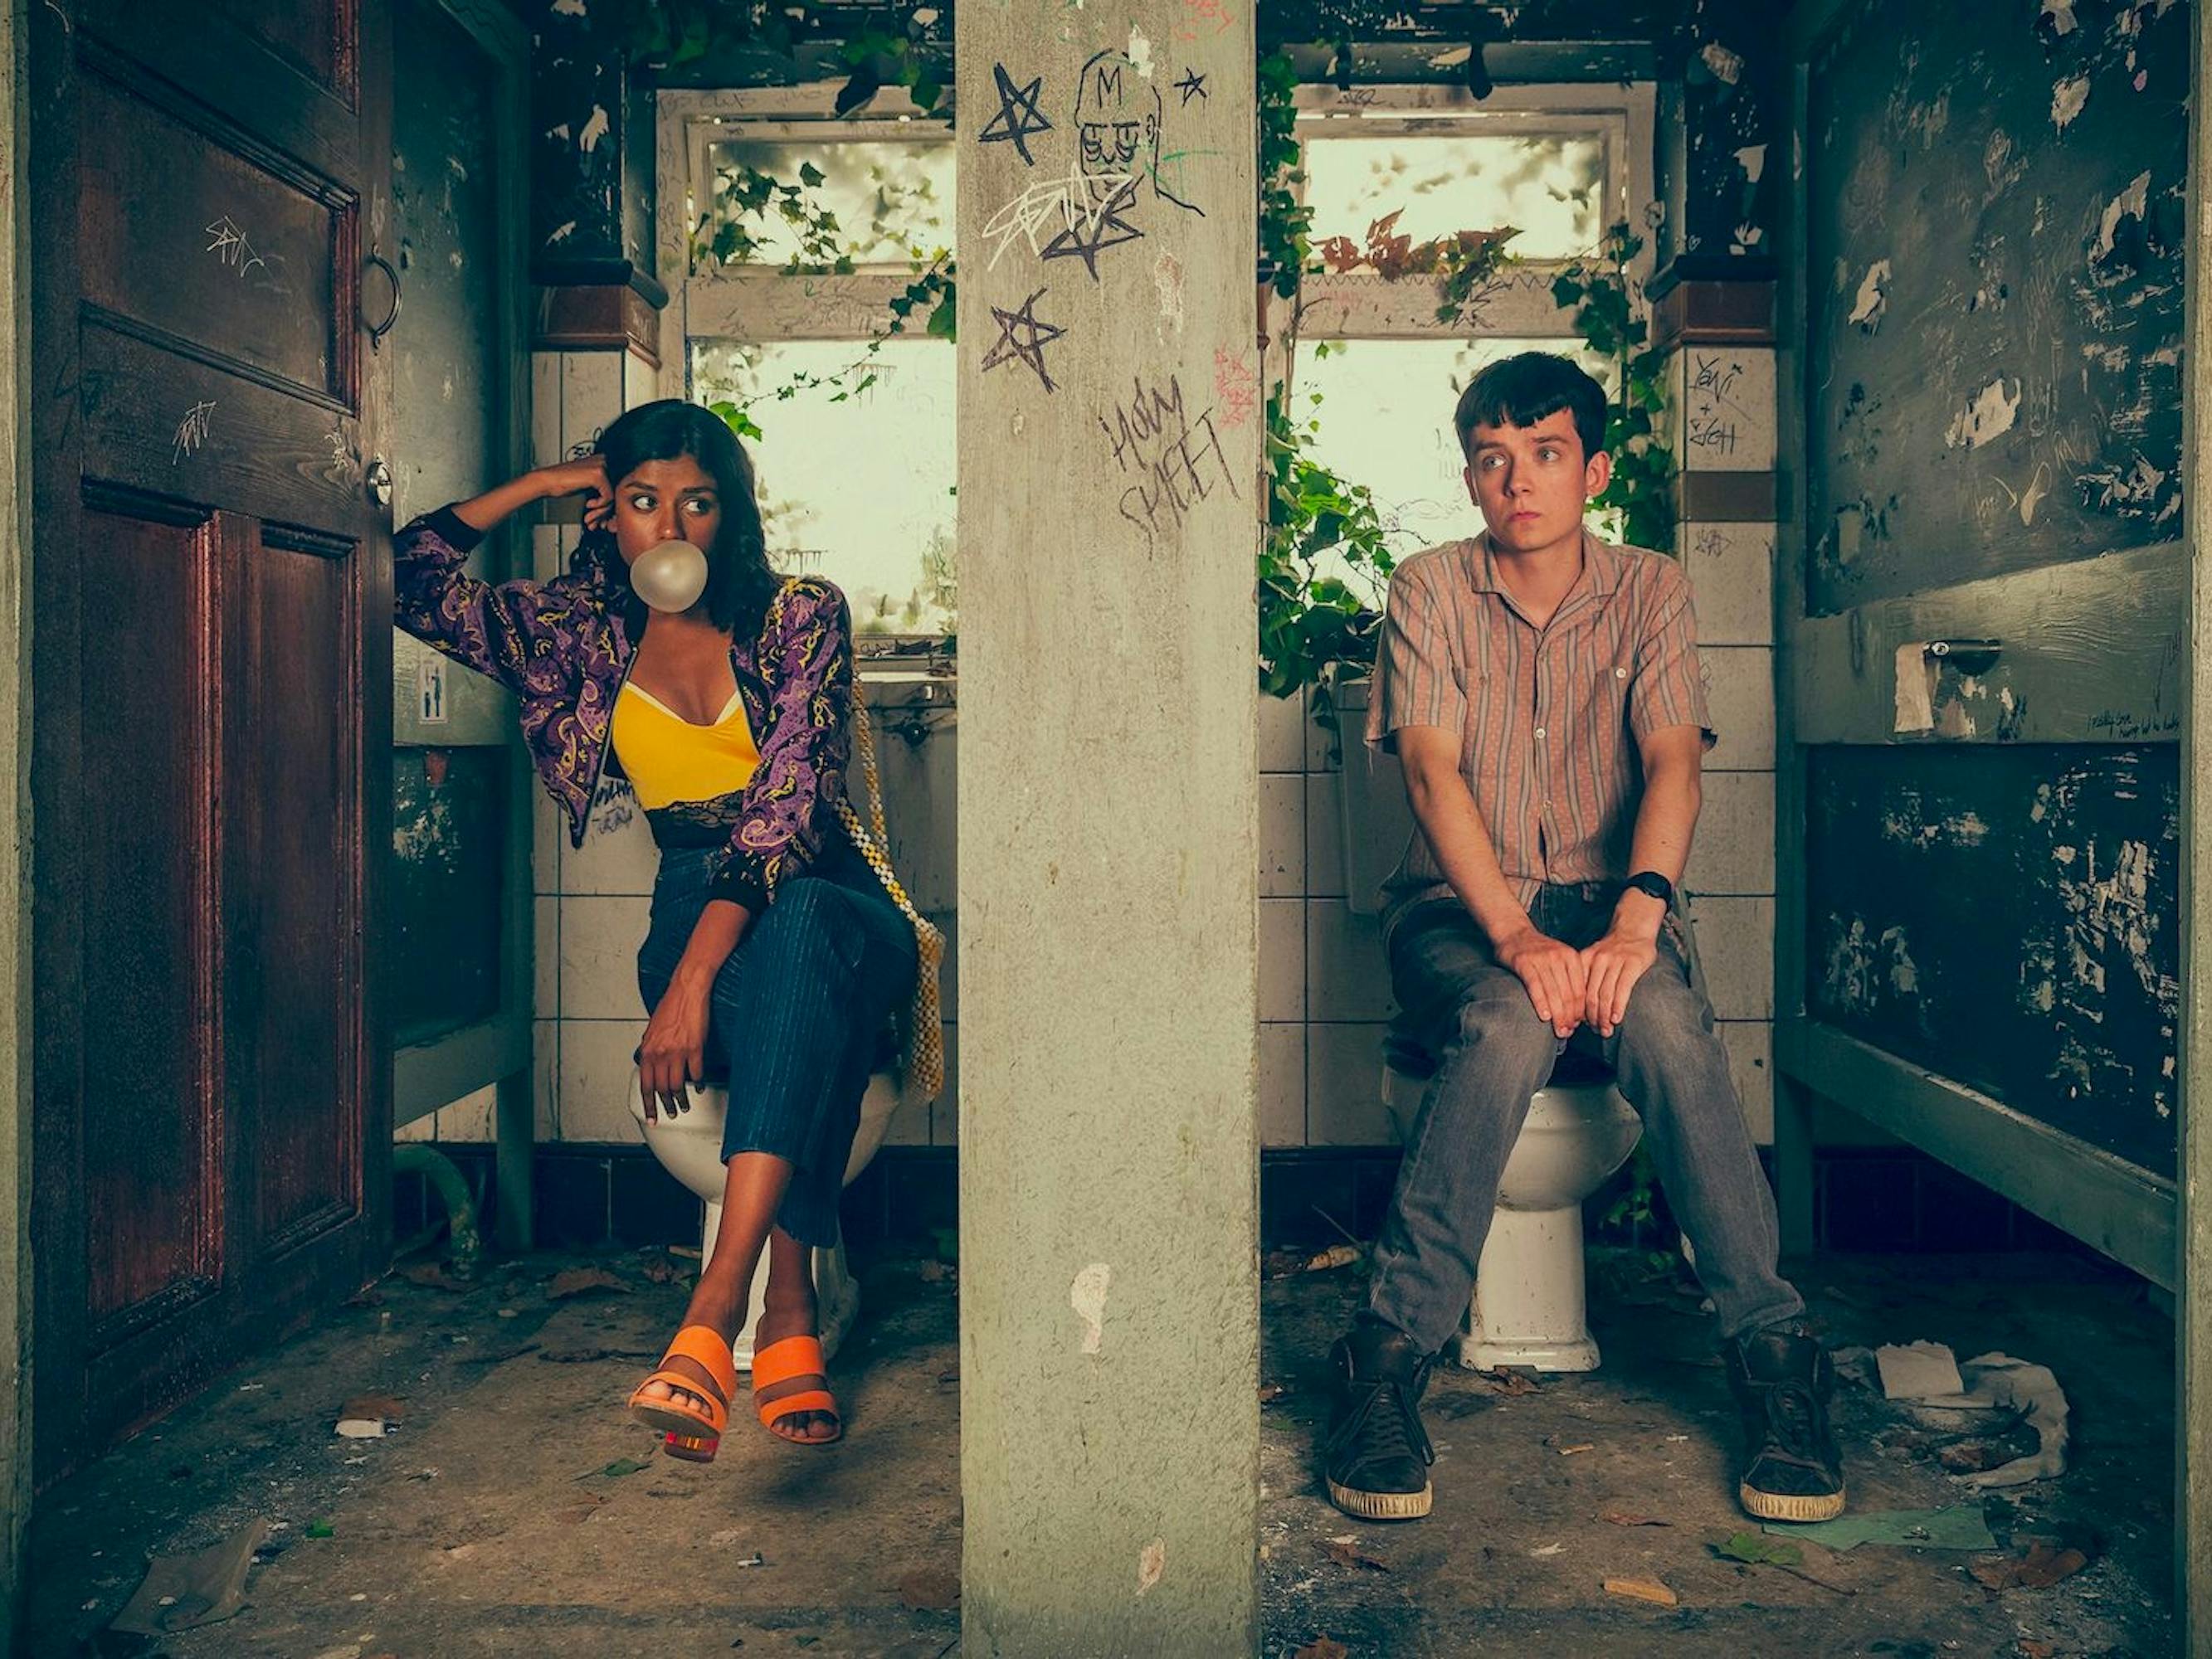 Olivia Hanan (Simone Ashley) and Otis Milburn (Asa Butterfield) in Sex Education. The two characters sit in the abandoned toilets. Ashly wears a chic outfit and blows a massive bubble. Butterfield wears dark jeans and a buttoned down shirt.